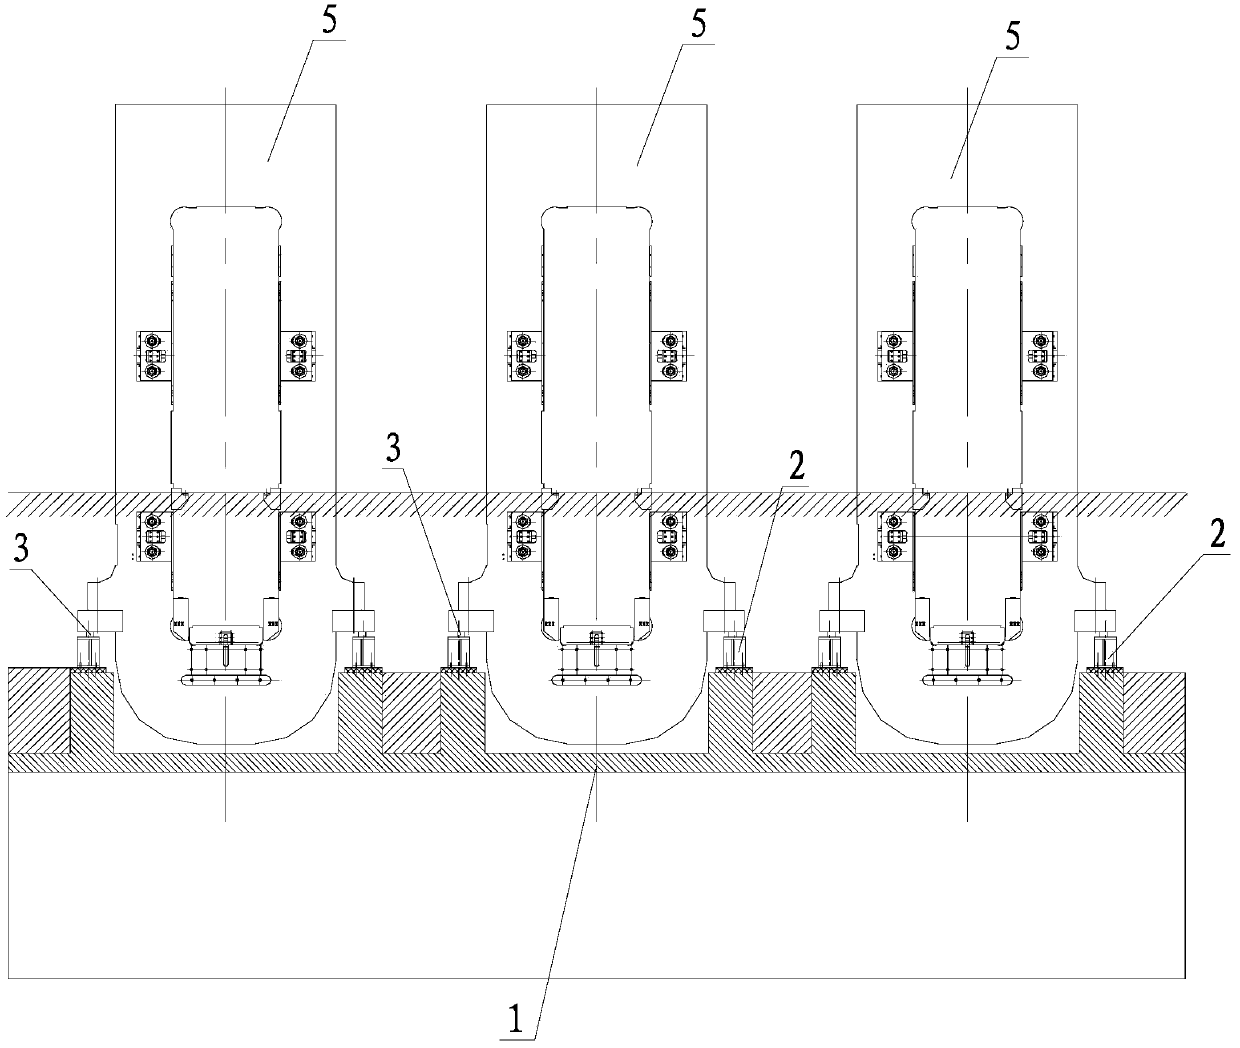 Online mounting method for mills on existing rolling lines